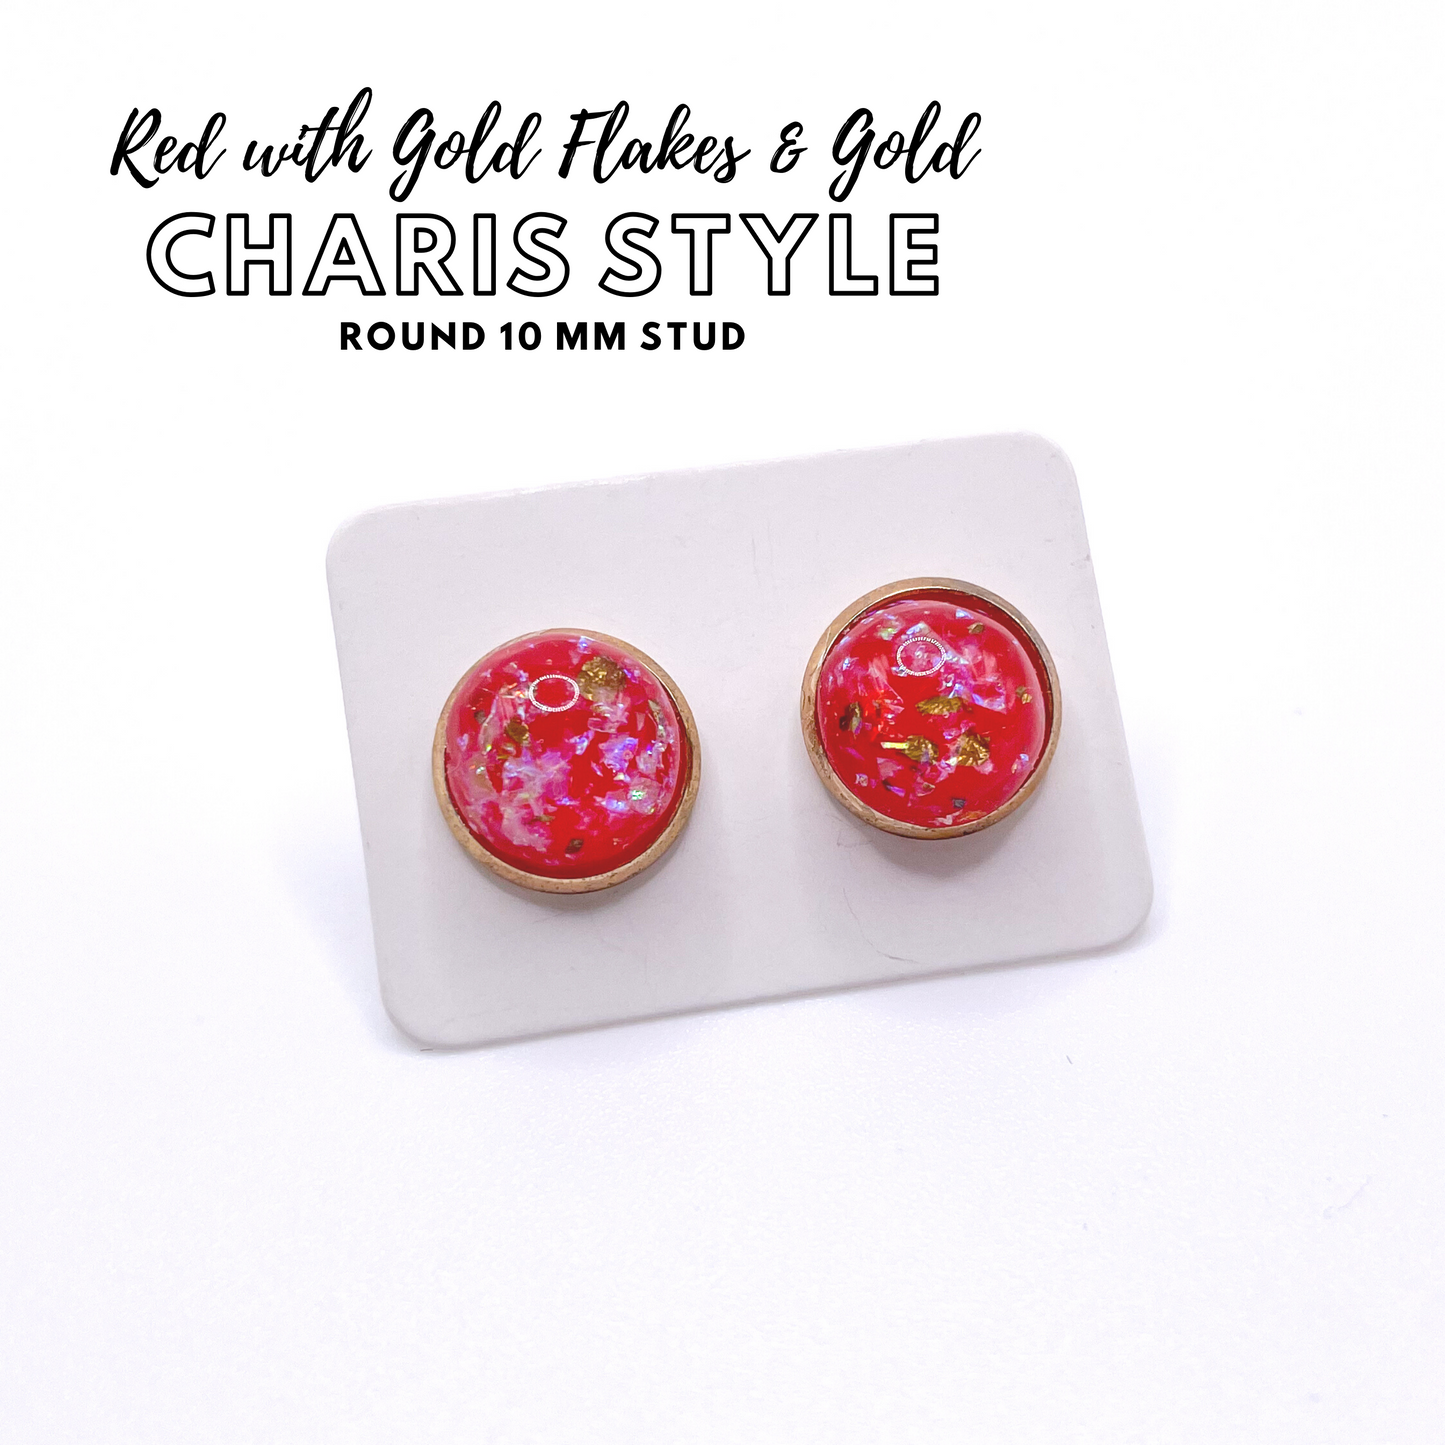 Charis Style - 10 MM Studs -  Red with Gold Flakes & Gold